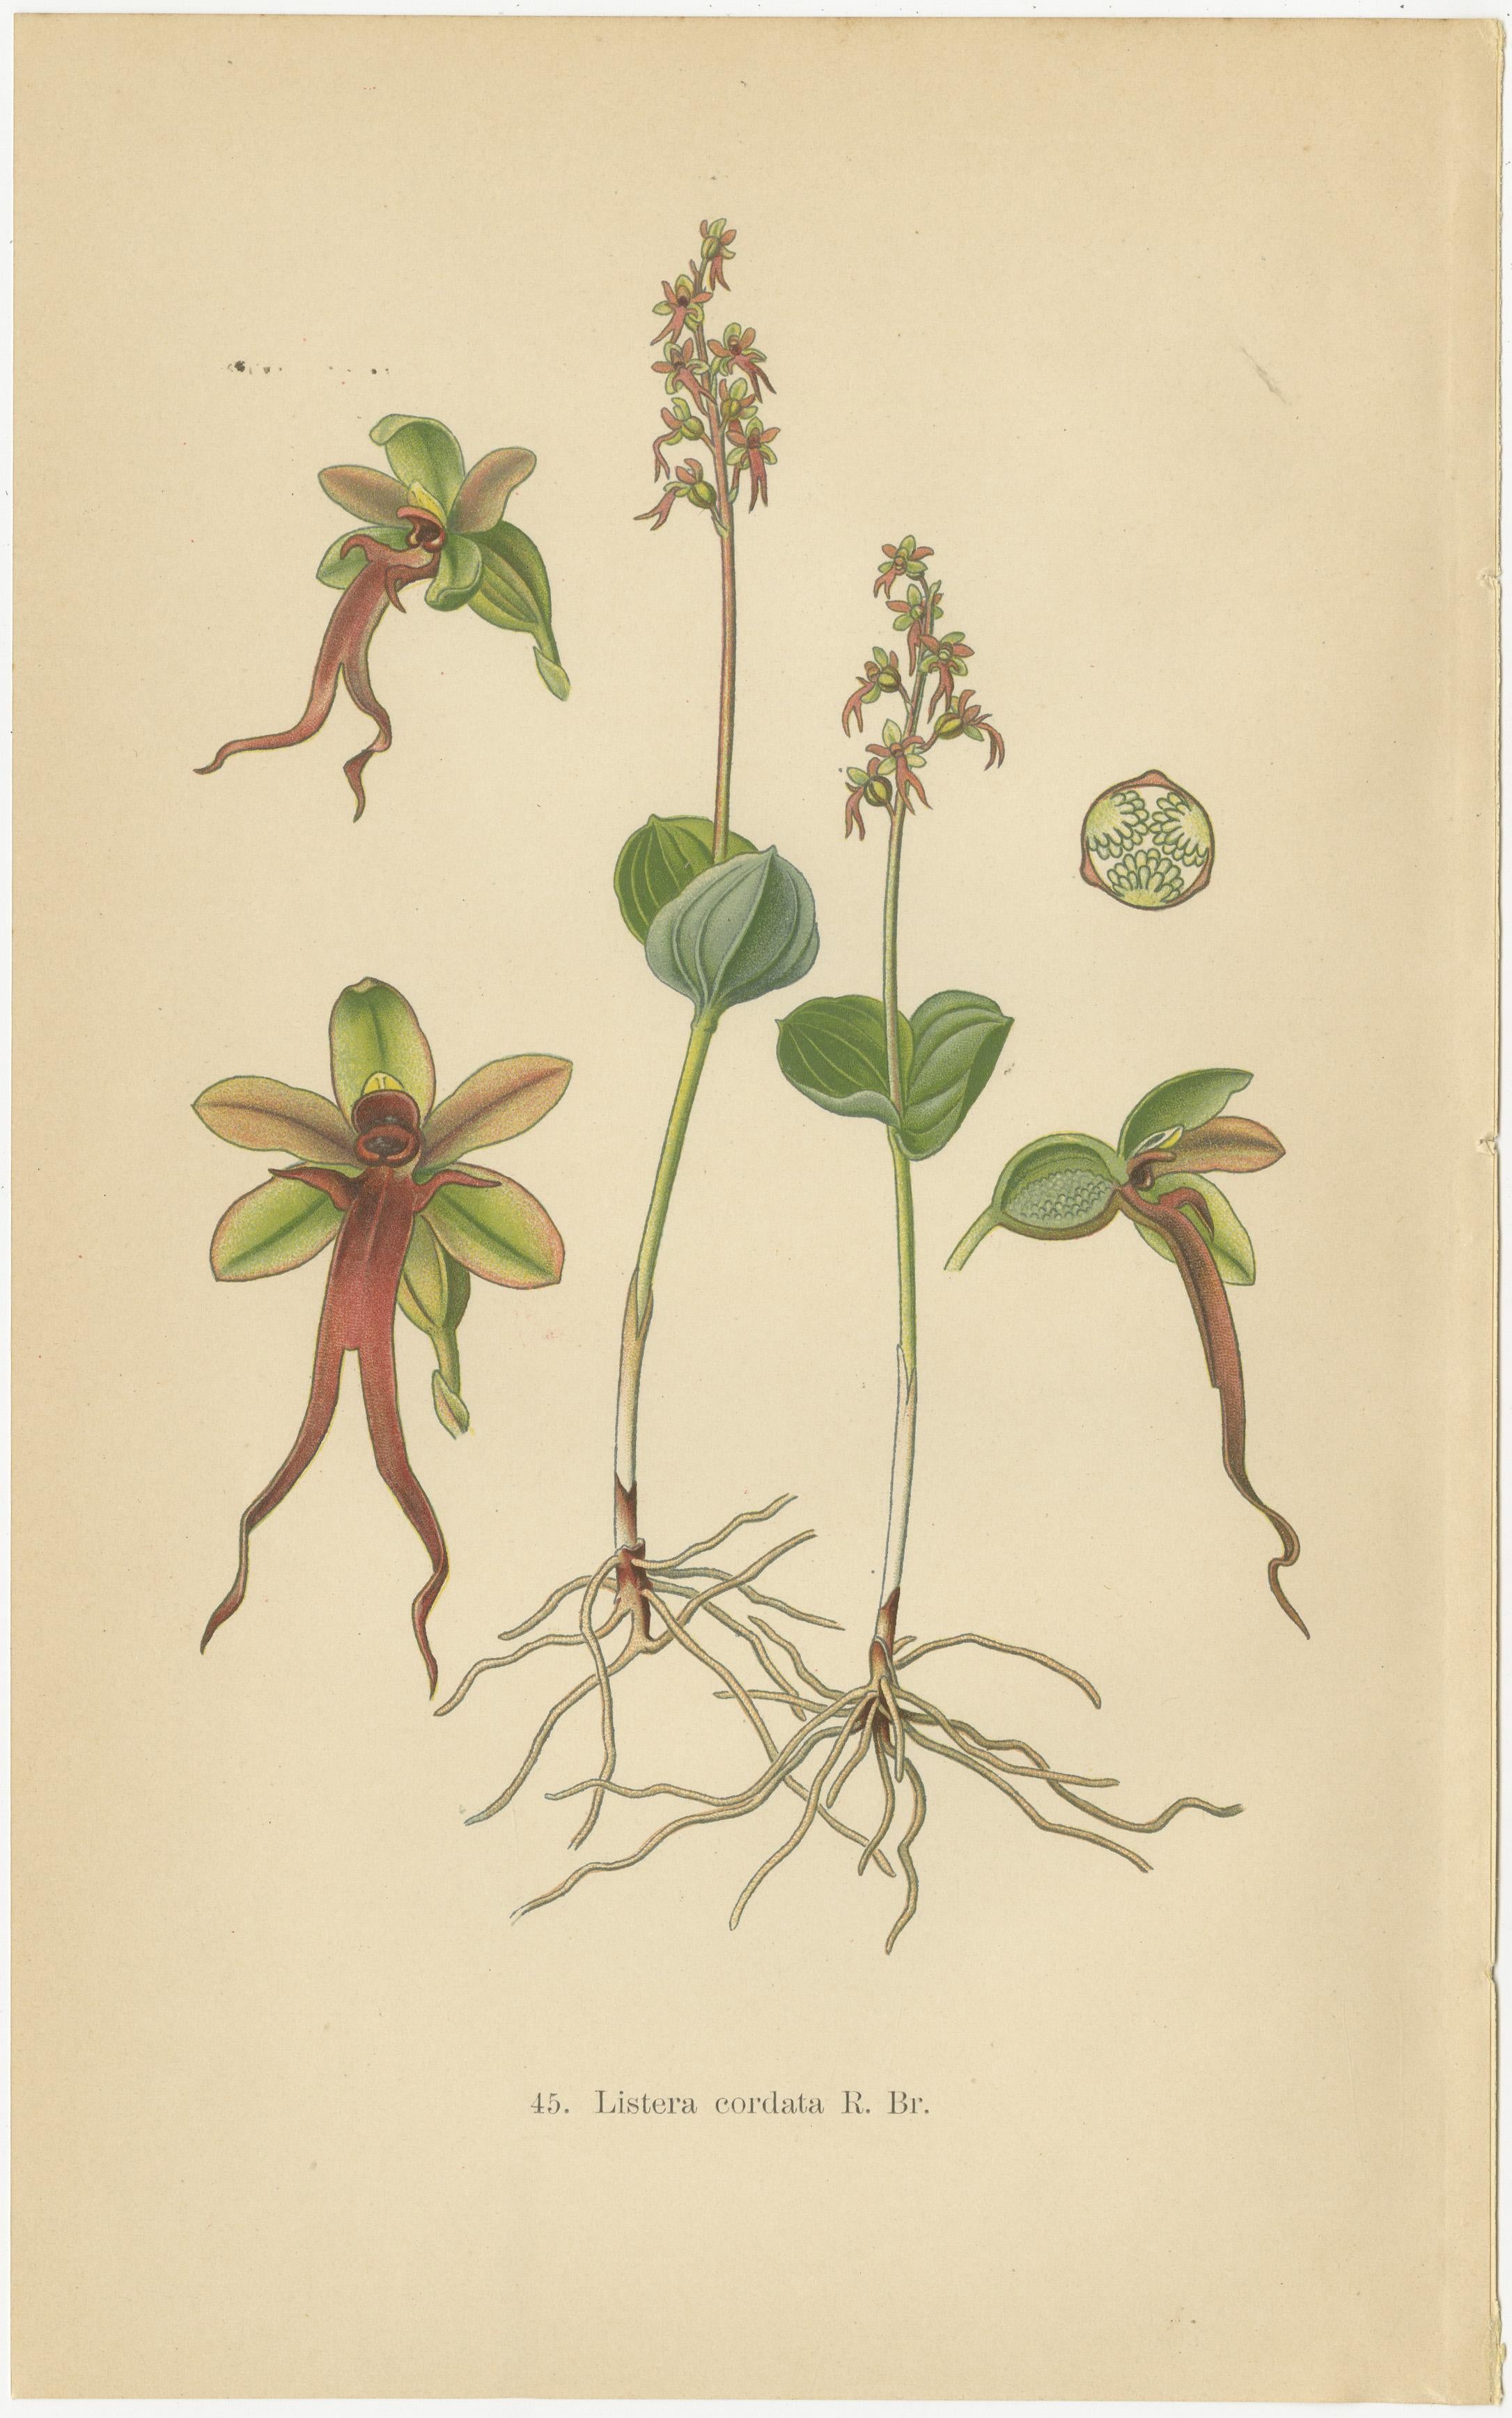 The collage features two antique botanical prints of Listera orchids from Walter Müller's book on orchid species found in Germany and surrounding areas, published in 1904. 

The first print depicts Listera cordata, commonly known as the heart-leaved